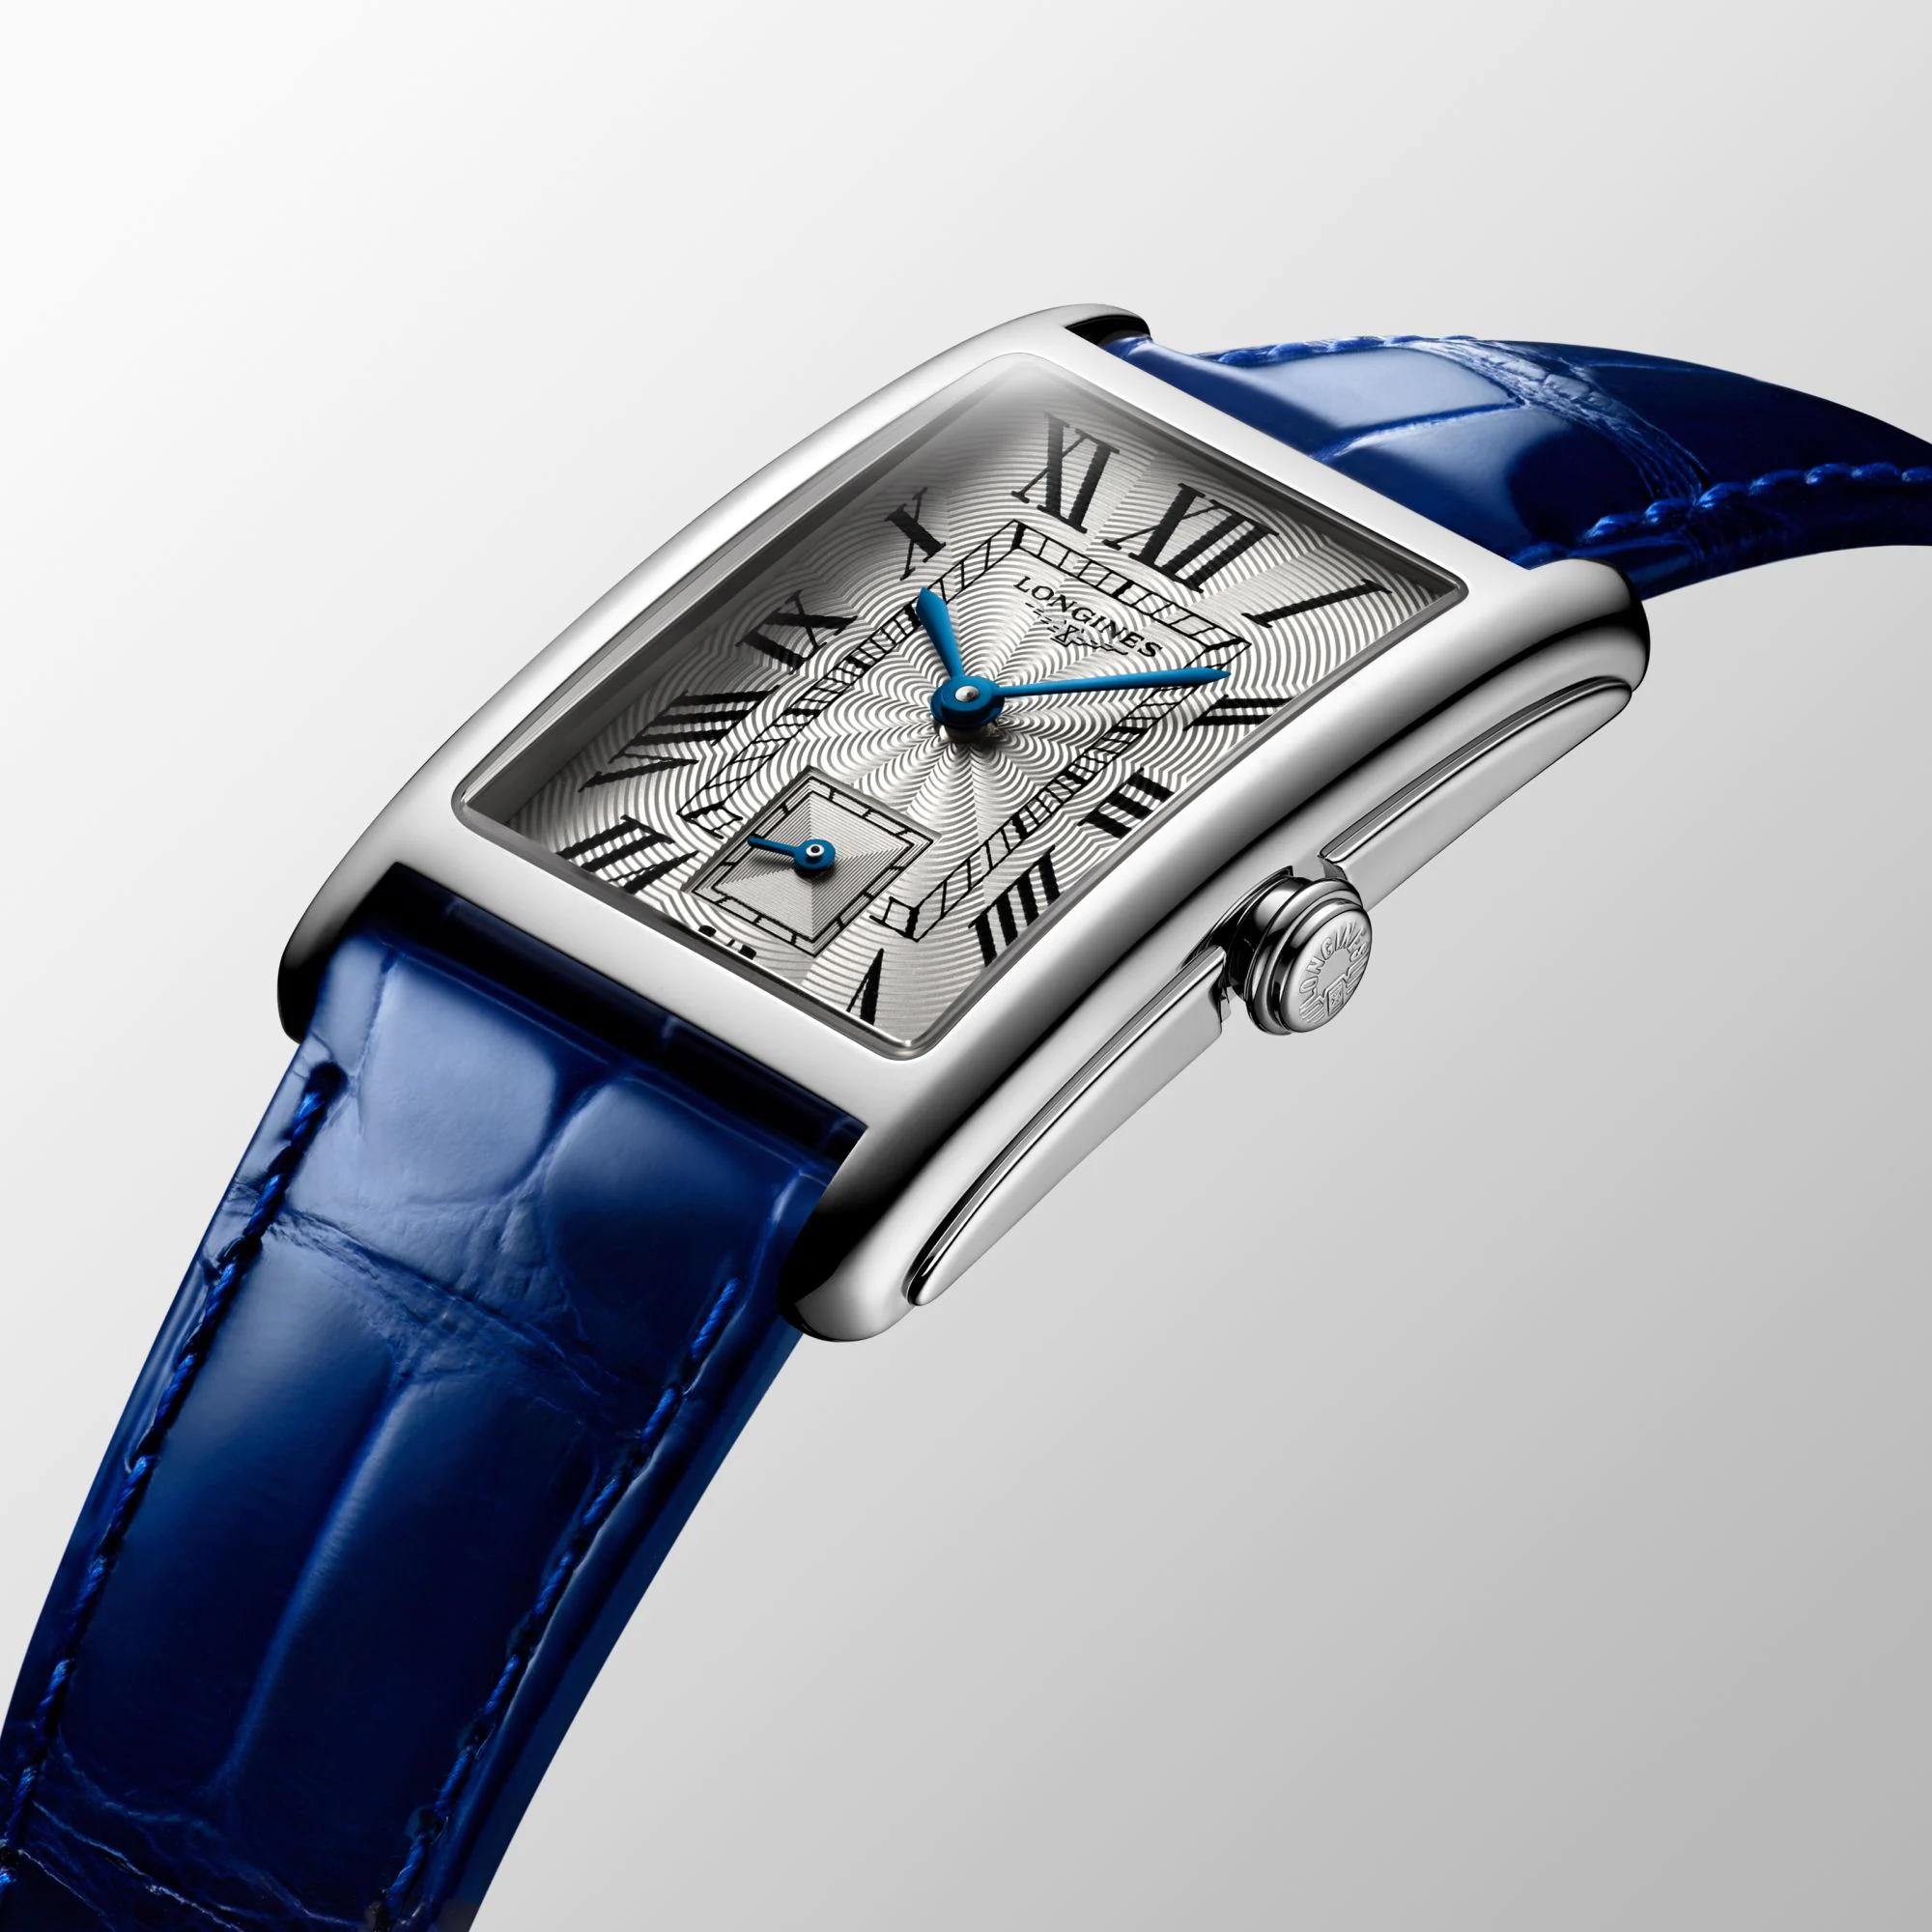 longines-dolcevita-l5-512-4-71-7-detailed-view-2000x2000-101-1667418040